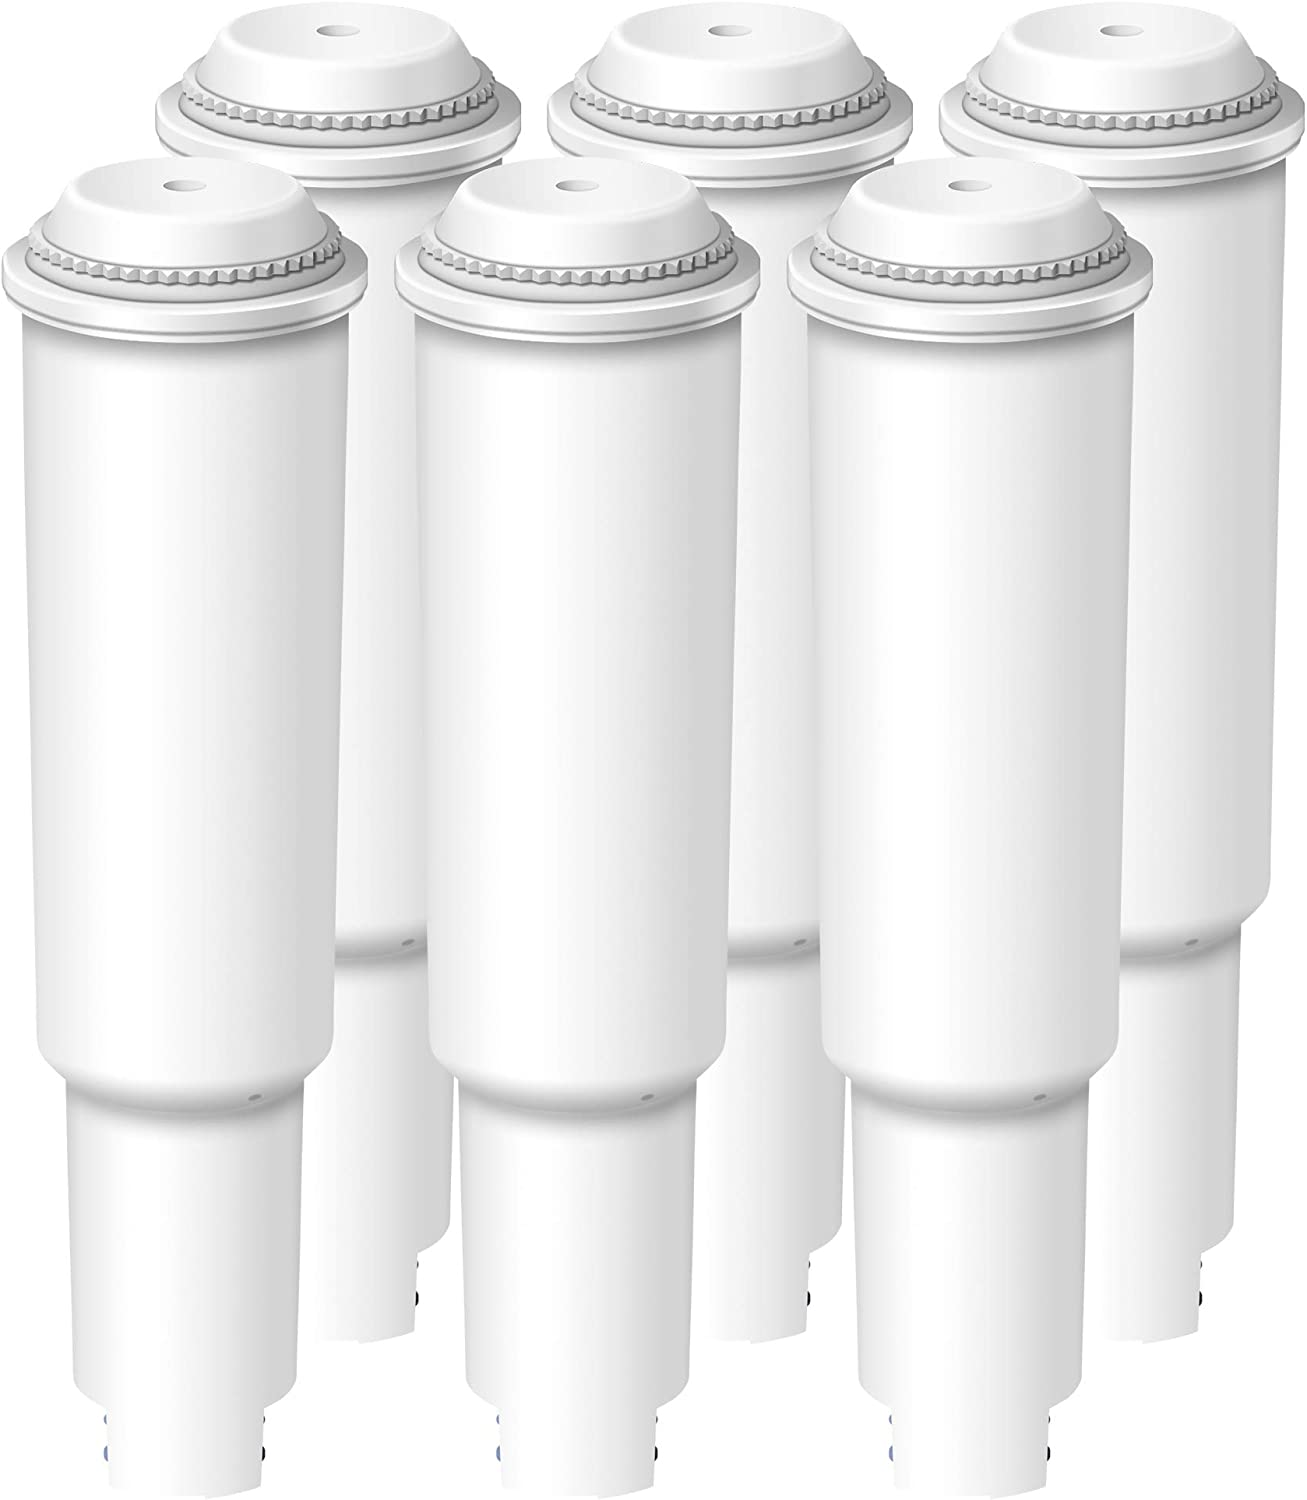 Waterdrop replacement filter cartridge for Jura 68739 White filter cartridge, Jura 60209 62911, NOT for coffee machines with ENA Blue cartridge (6)